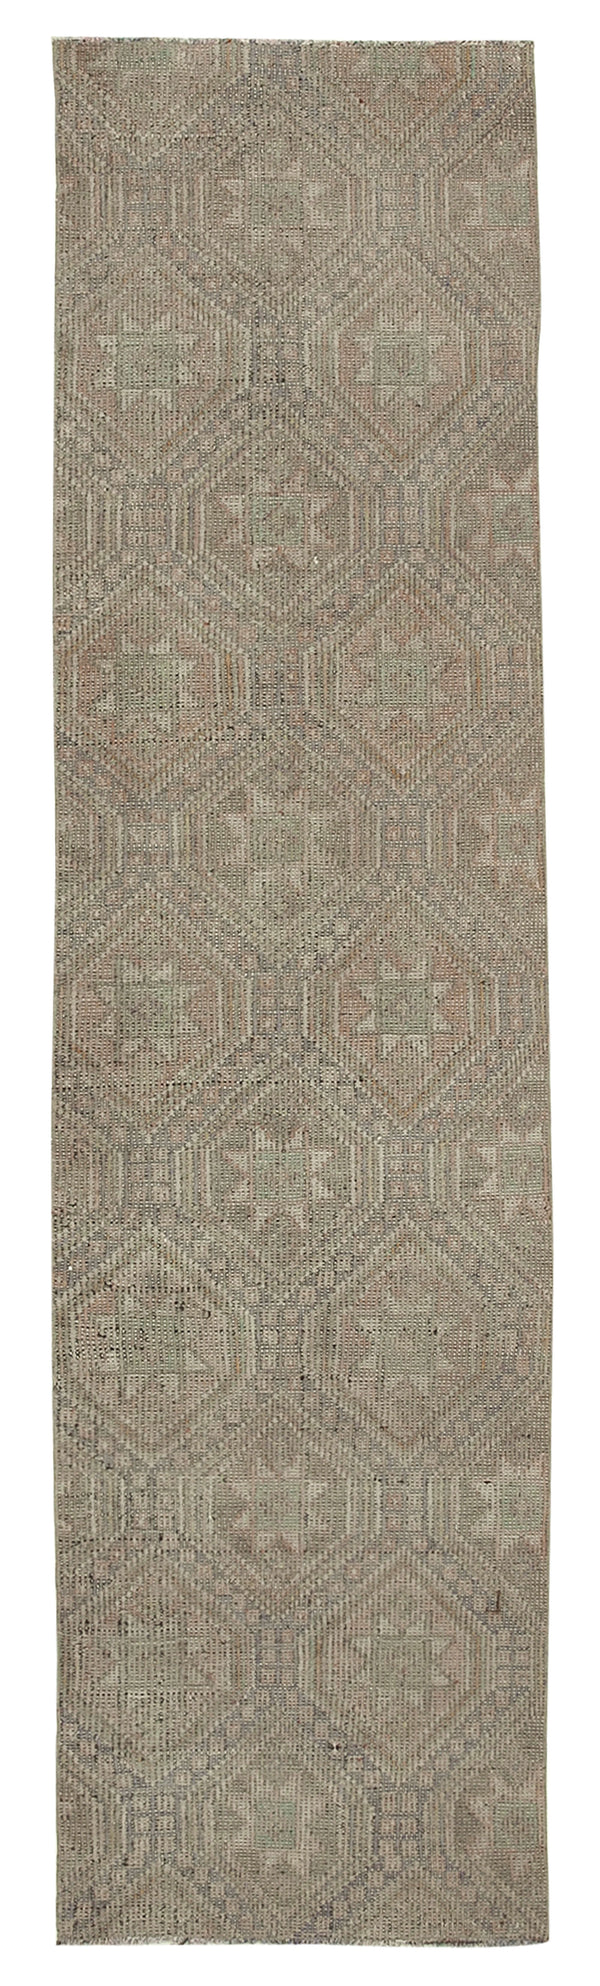 Handmade Kilim Runner > Design# OL-AC-29225 > Size: 2'-6" x 9'-8", Carpet Culture Rugs, Handmade Rugs, NYC Rugs, New Rugs, Shop Rugs, Rug Store, Outlet Rugs, SoHo Rugs, Rugs in USA